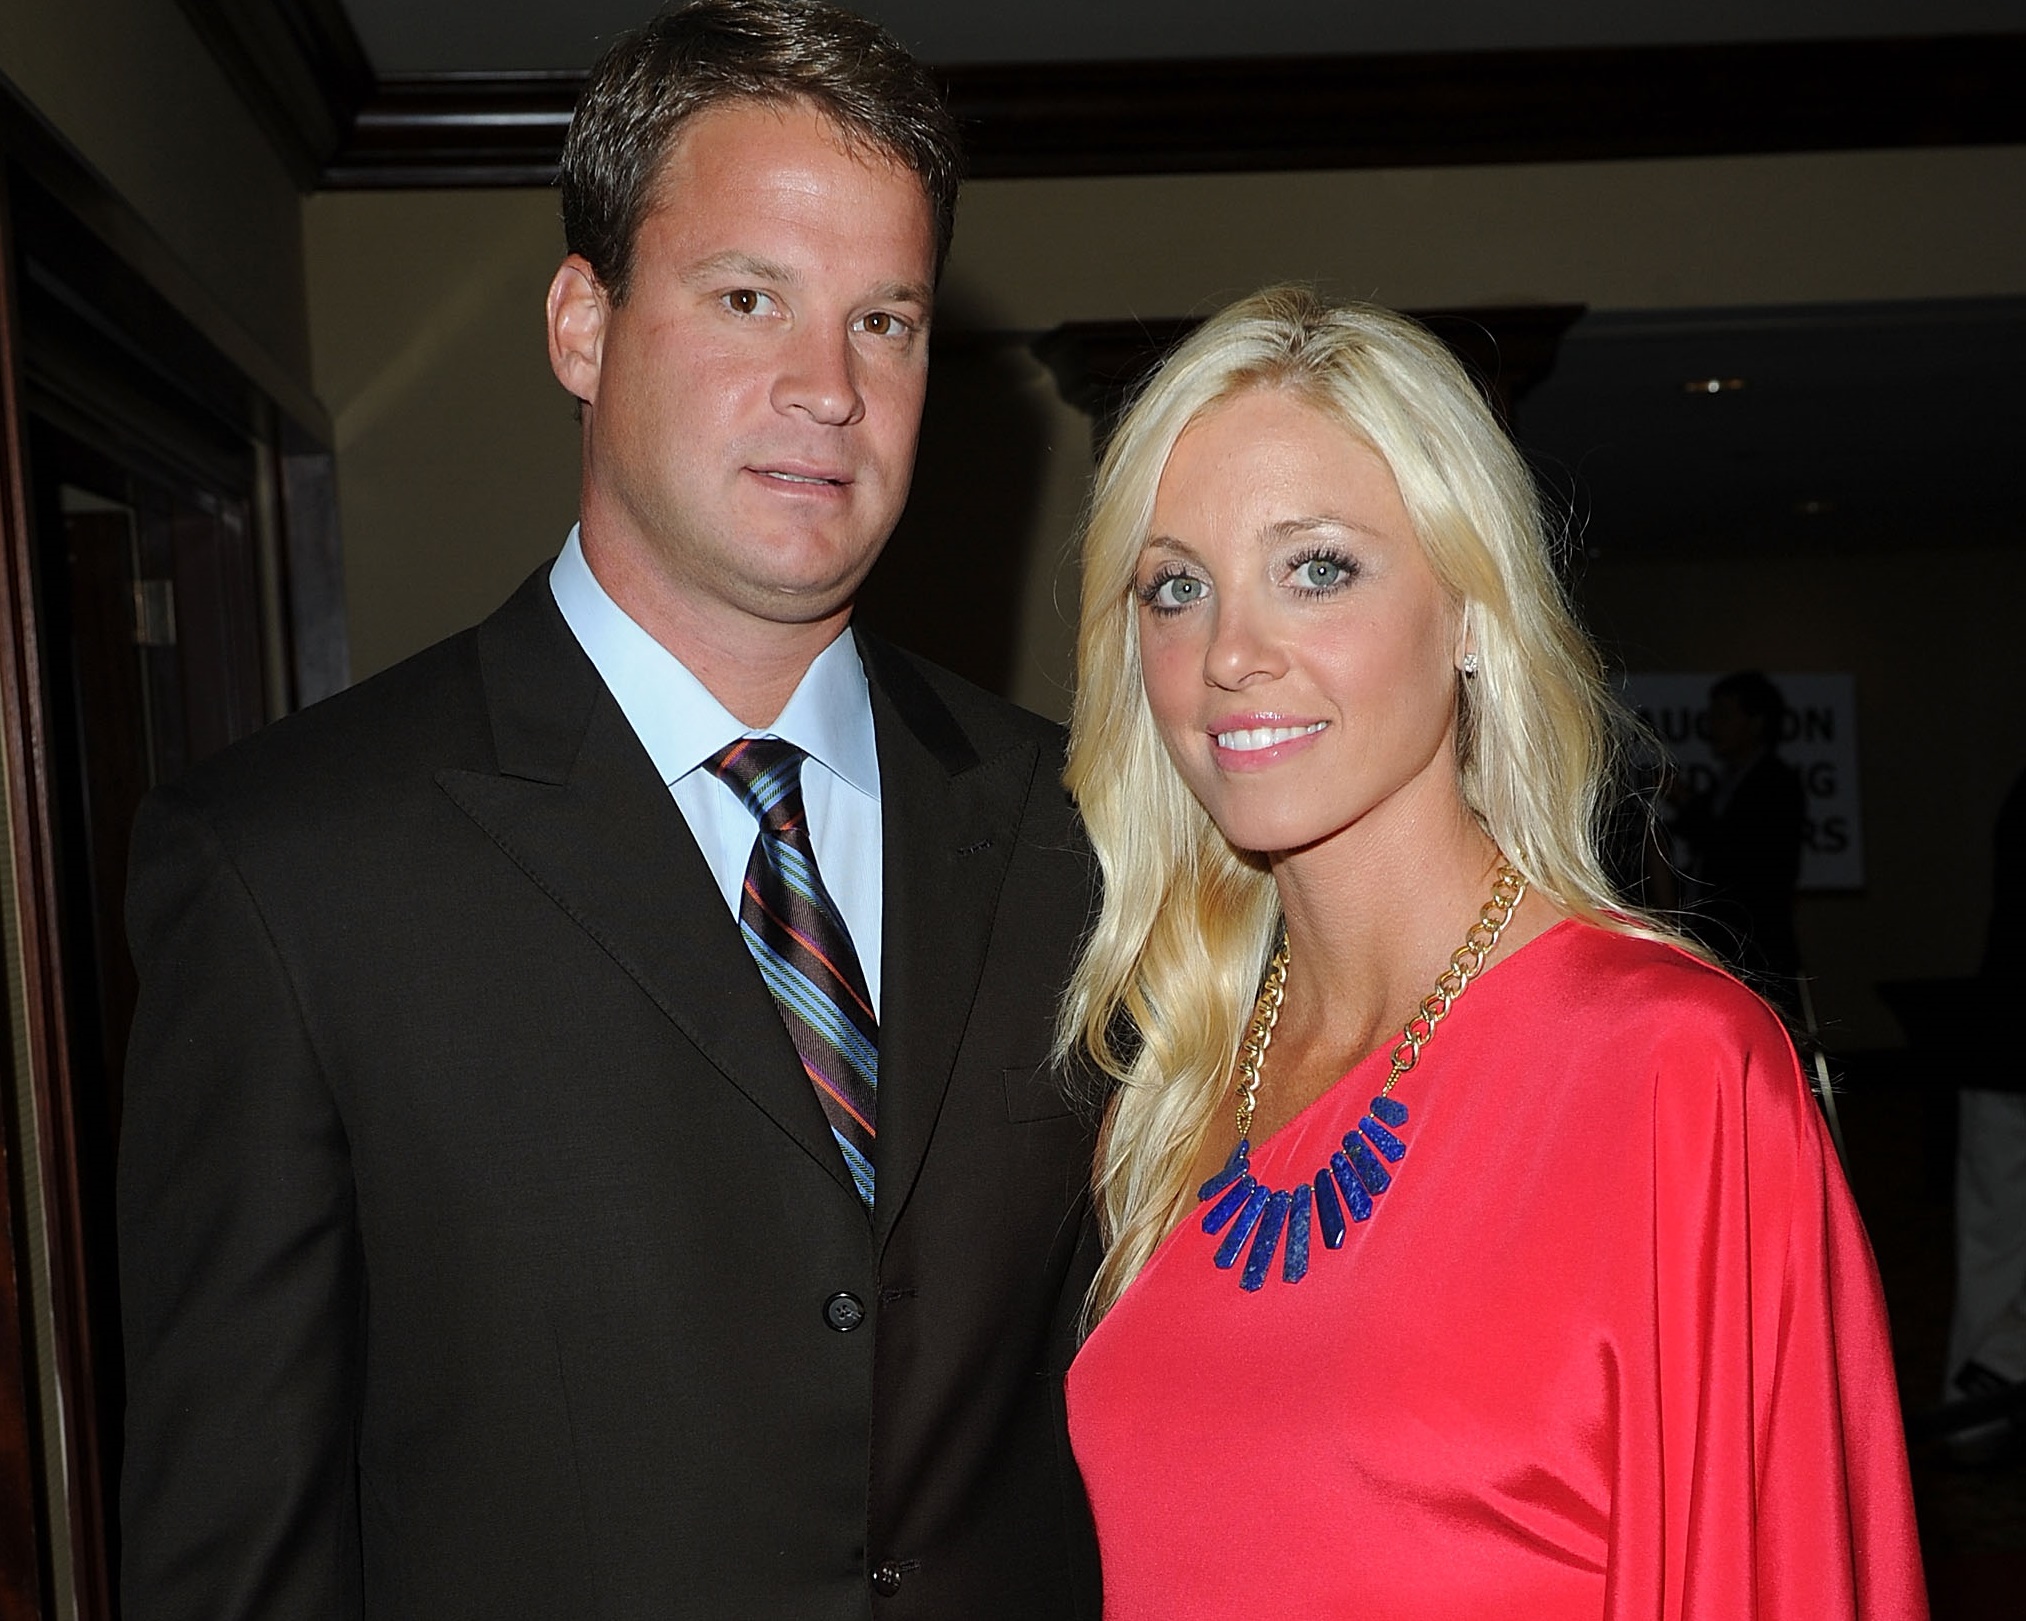 Lane Kiffin admits he was not fully focused on Alabama 